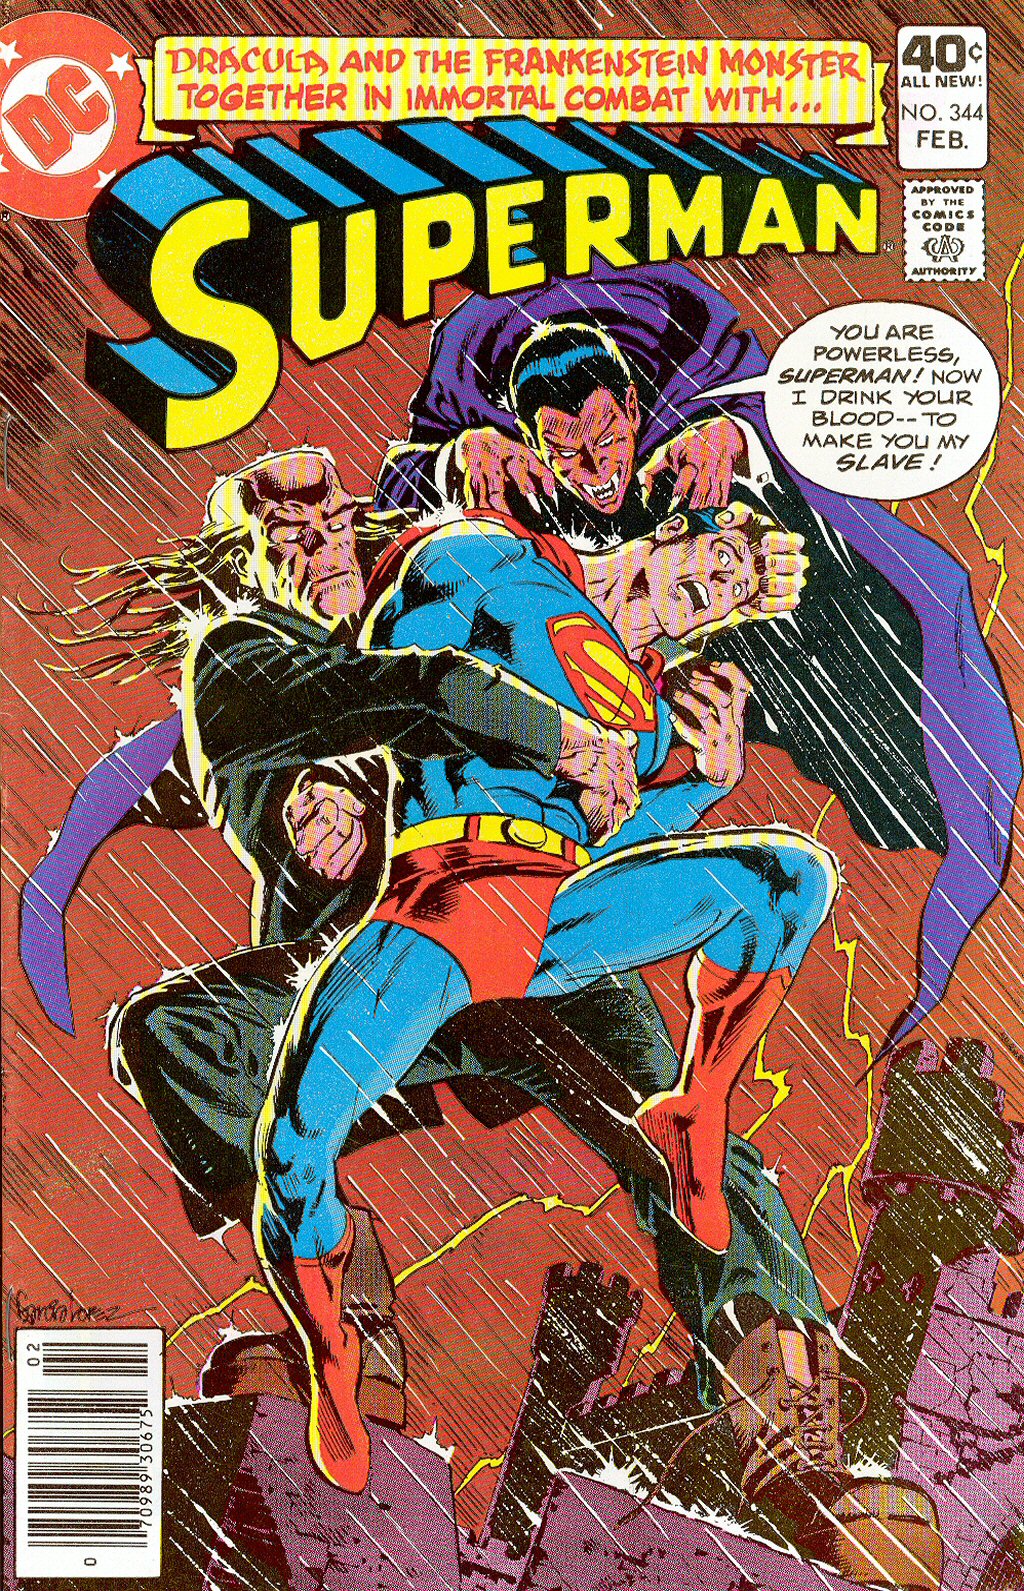 From Superman (Vol. 1) #344 (1980) Cover